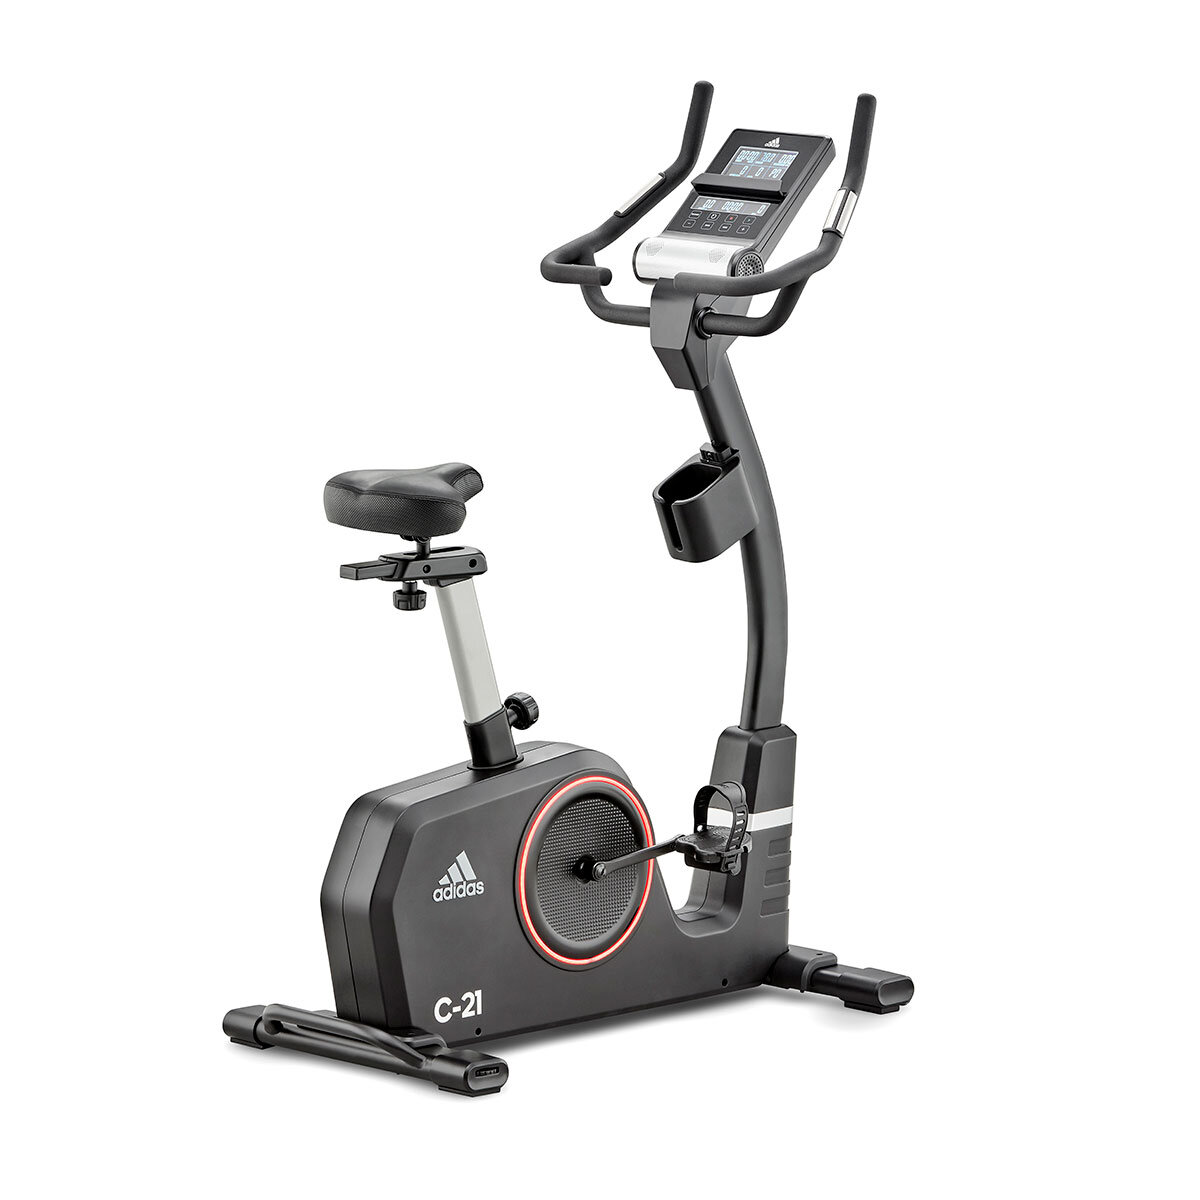 Lead Image for Adidas C21 Spin Bike